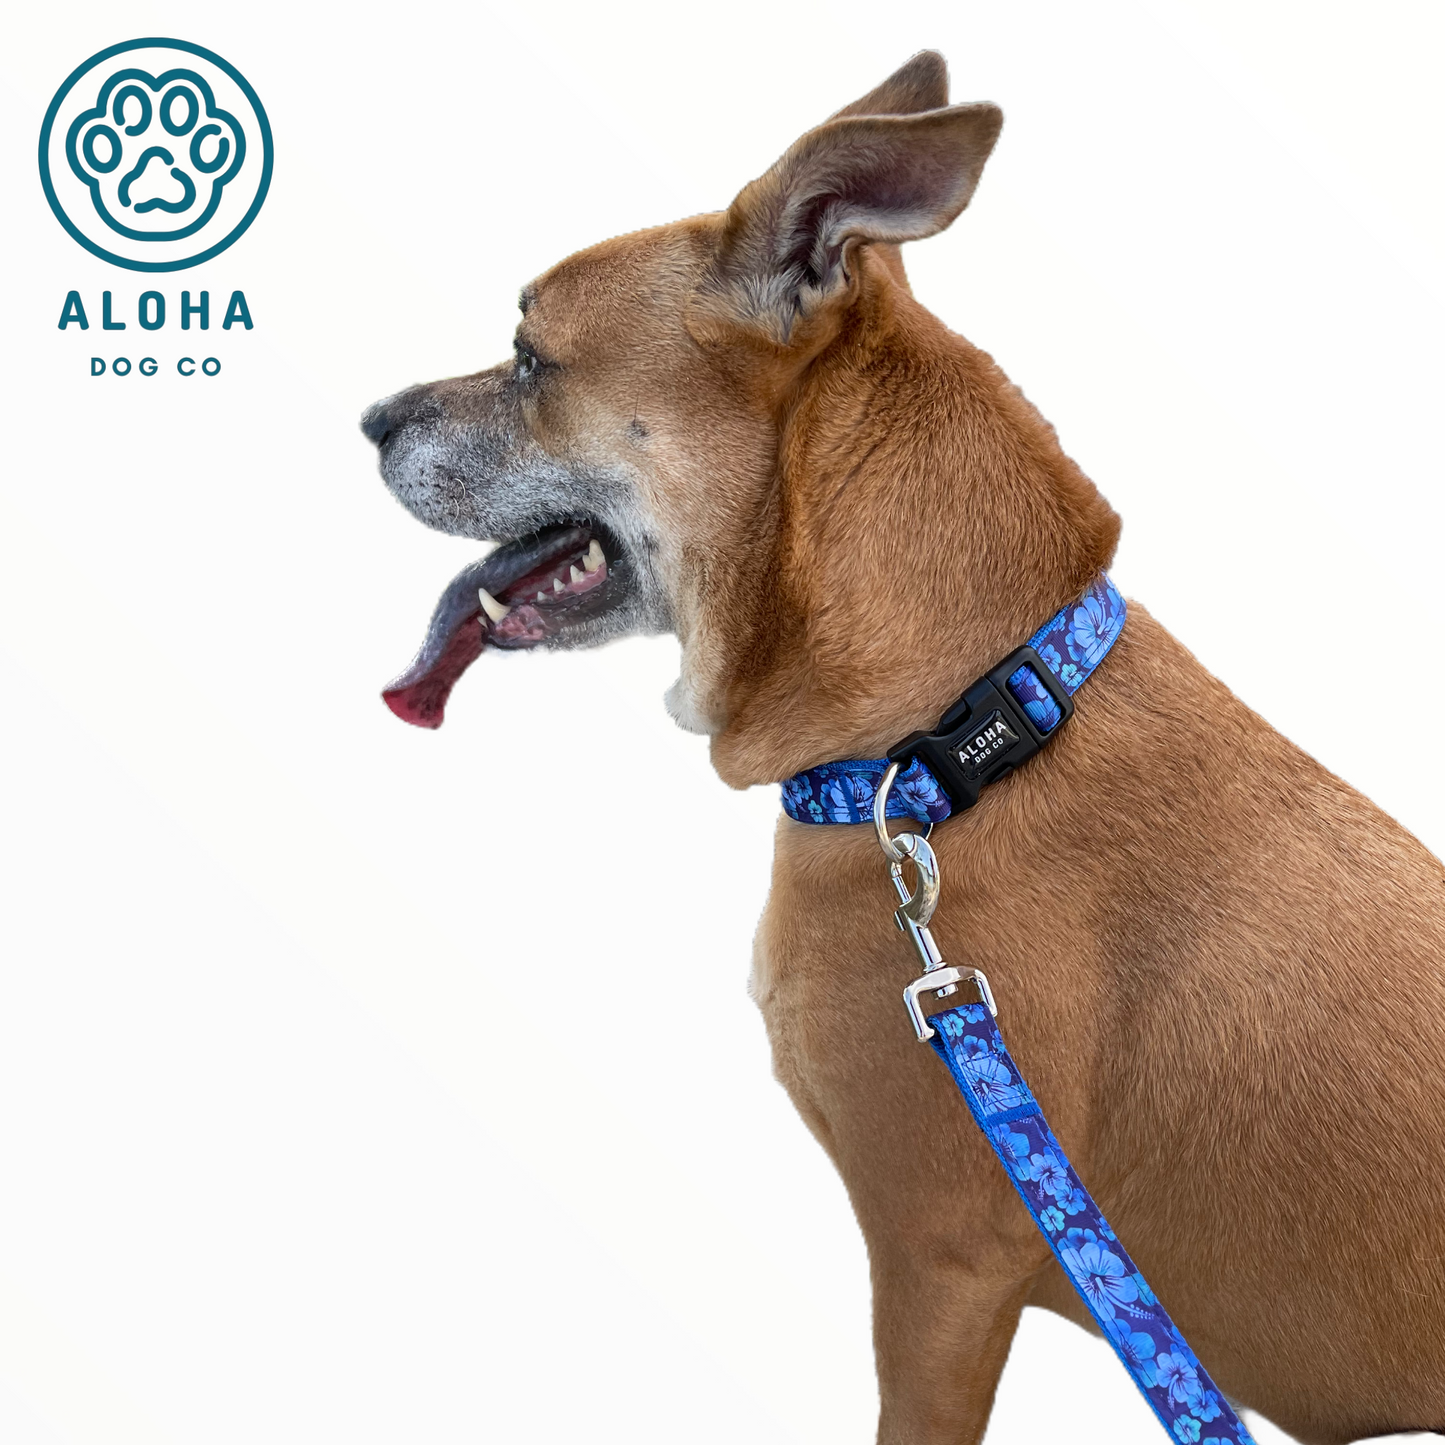 Mixed Breed Dog in Tropical Blue Leash